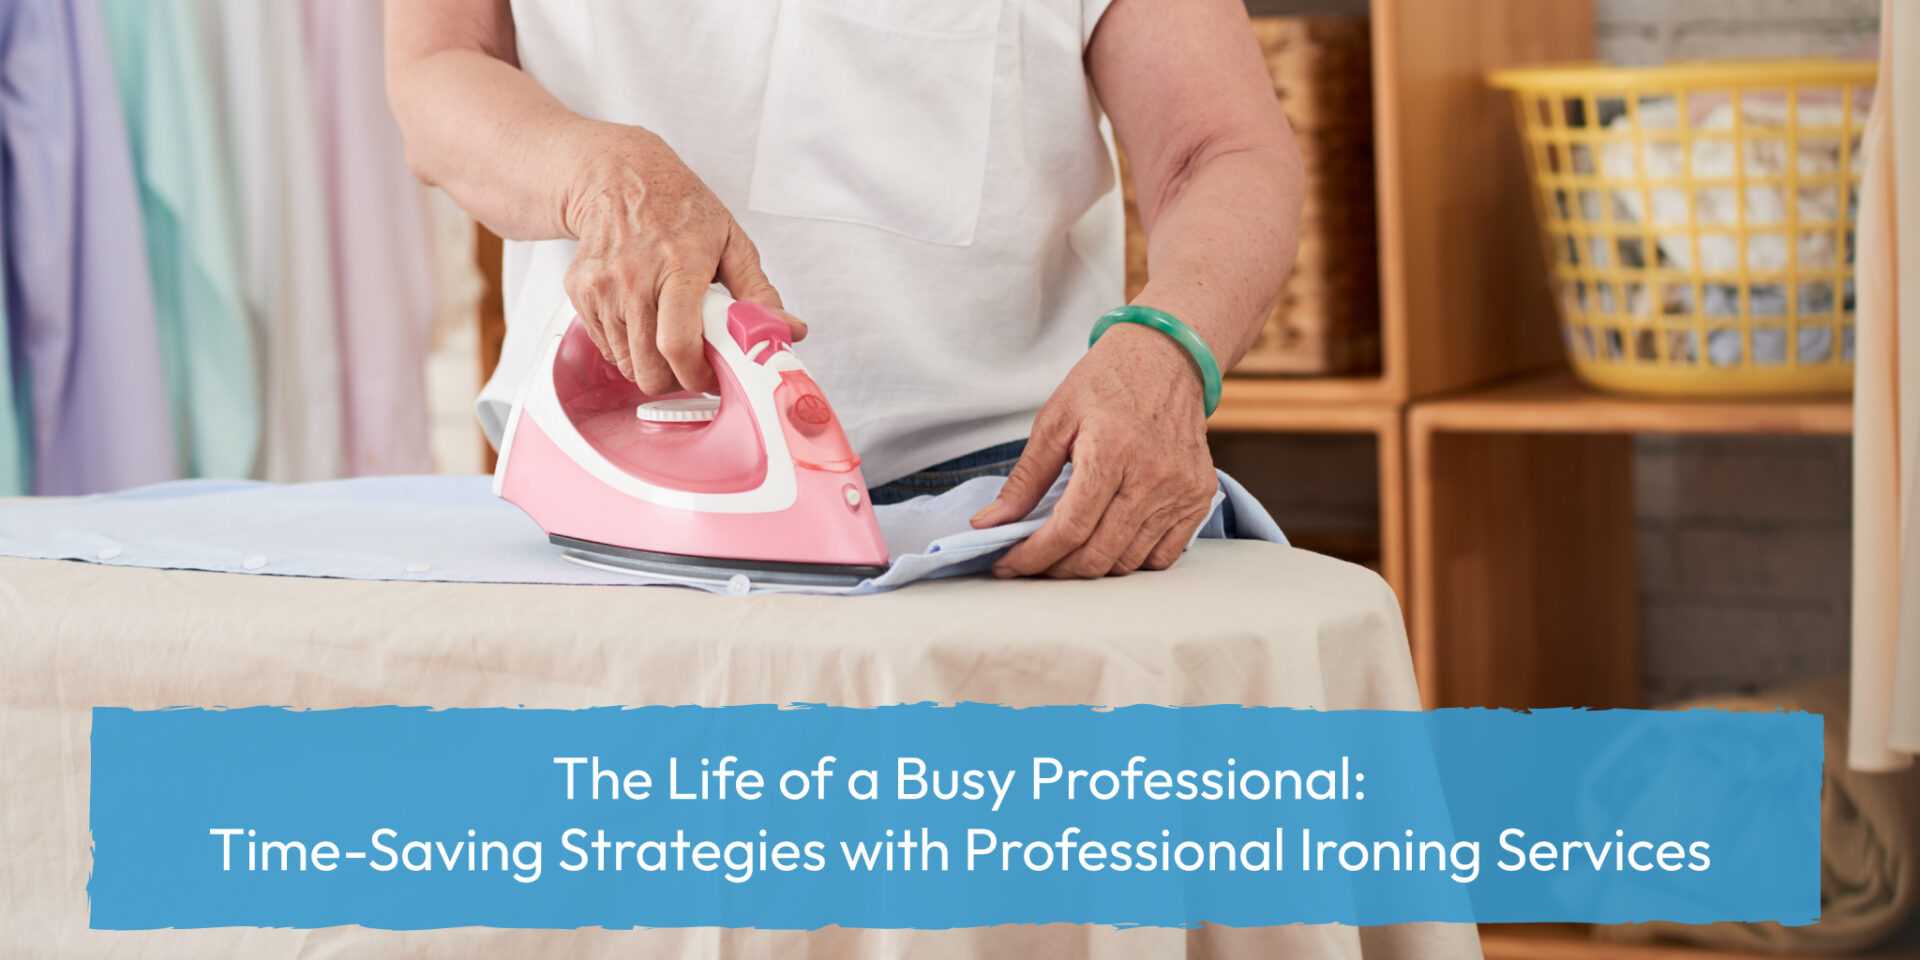 Time-Saving Strategies with Professional Ironing Services